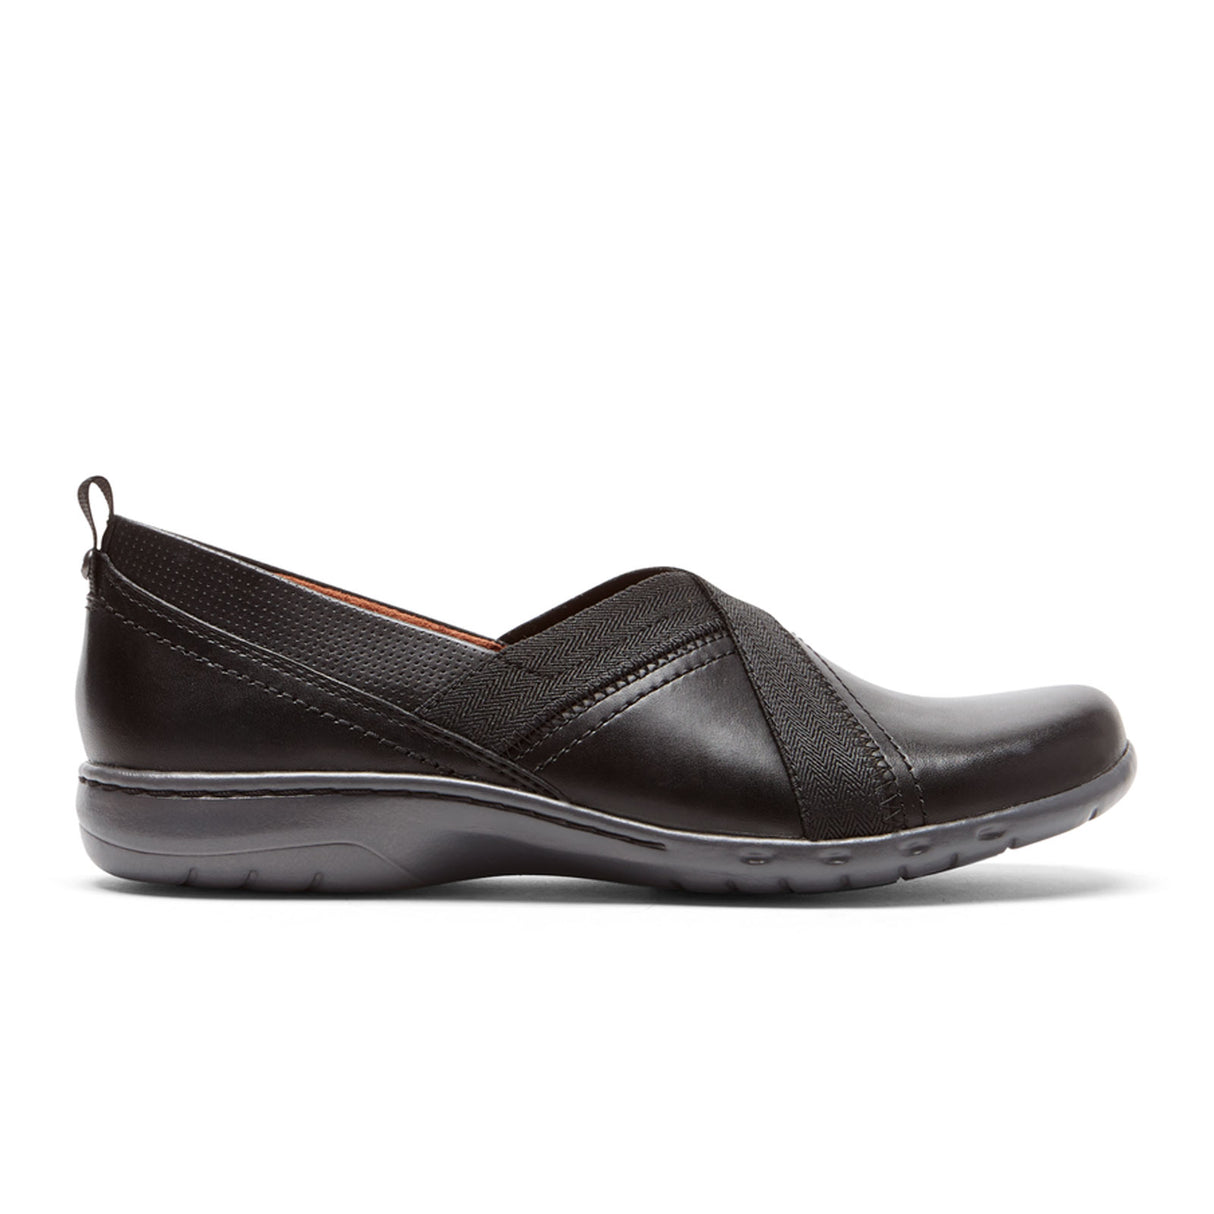 Cobb Hill Penfield Envelope Slip On Loafer (Women) - Black Leather Dress-Casual\Slip Ons - The Heel Shoe Fitters